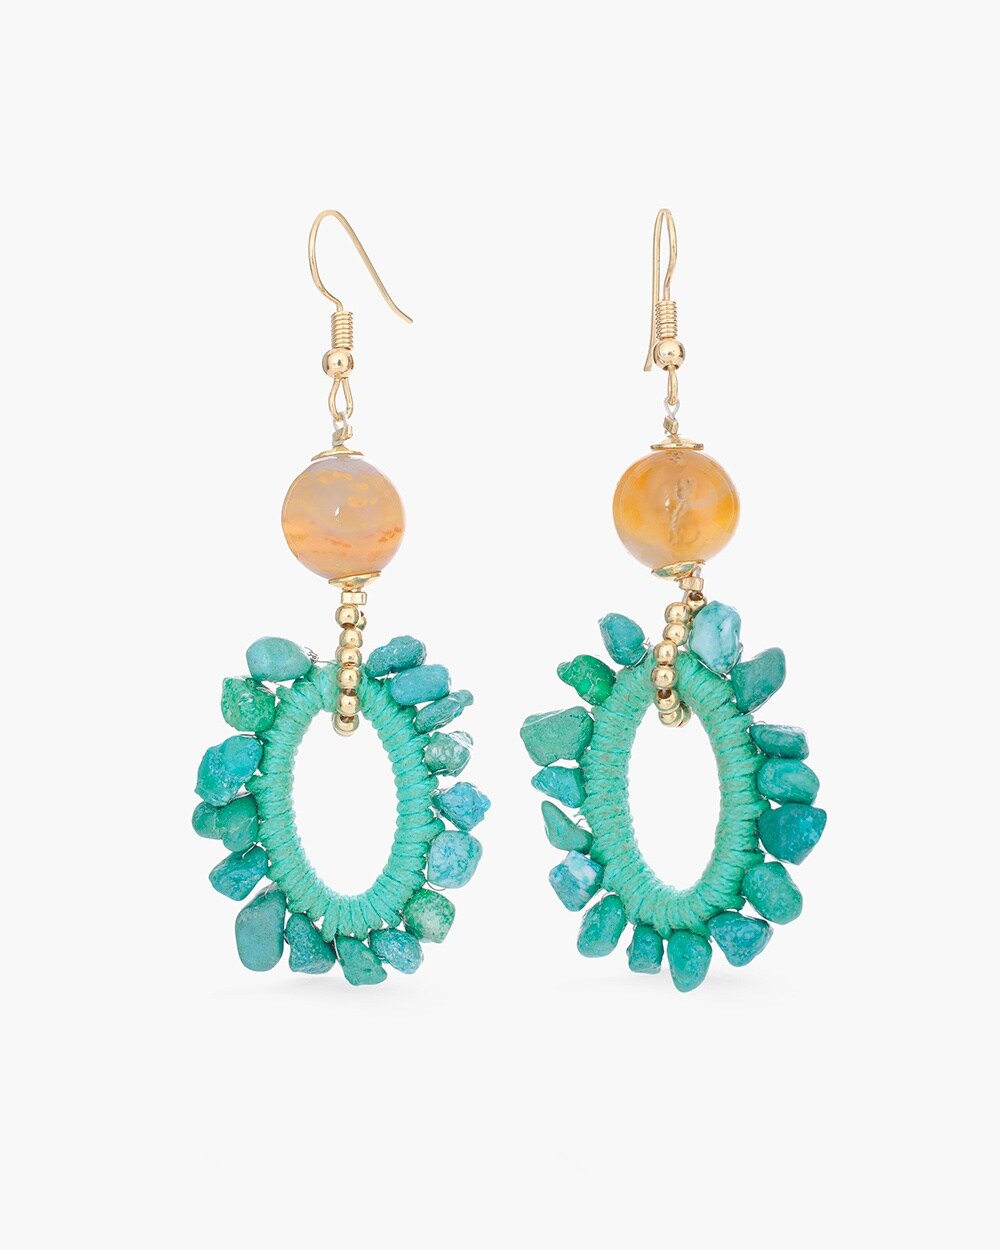 Turquoise and Neutral Drop Stone Earrings